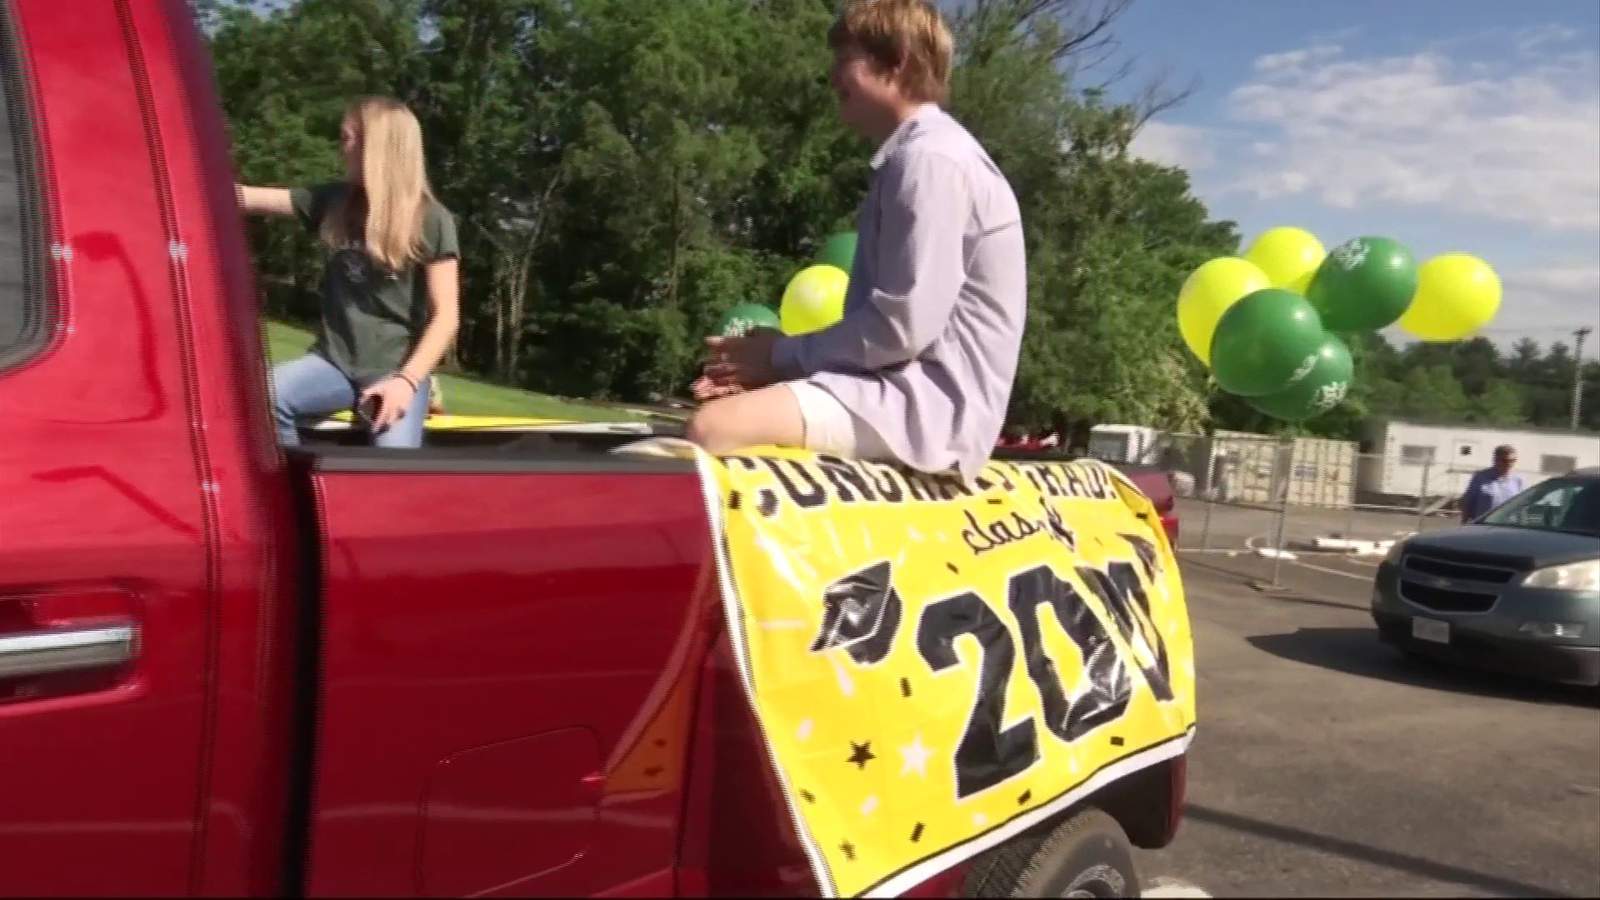 North Cross School graduates celebrate with victory lap in school’s parking lot